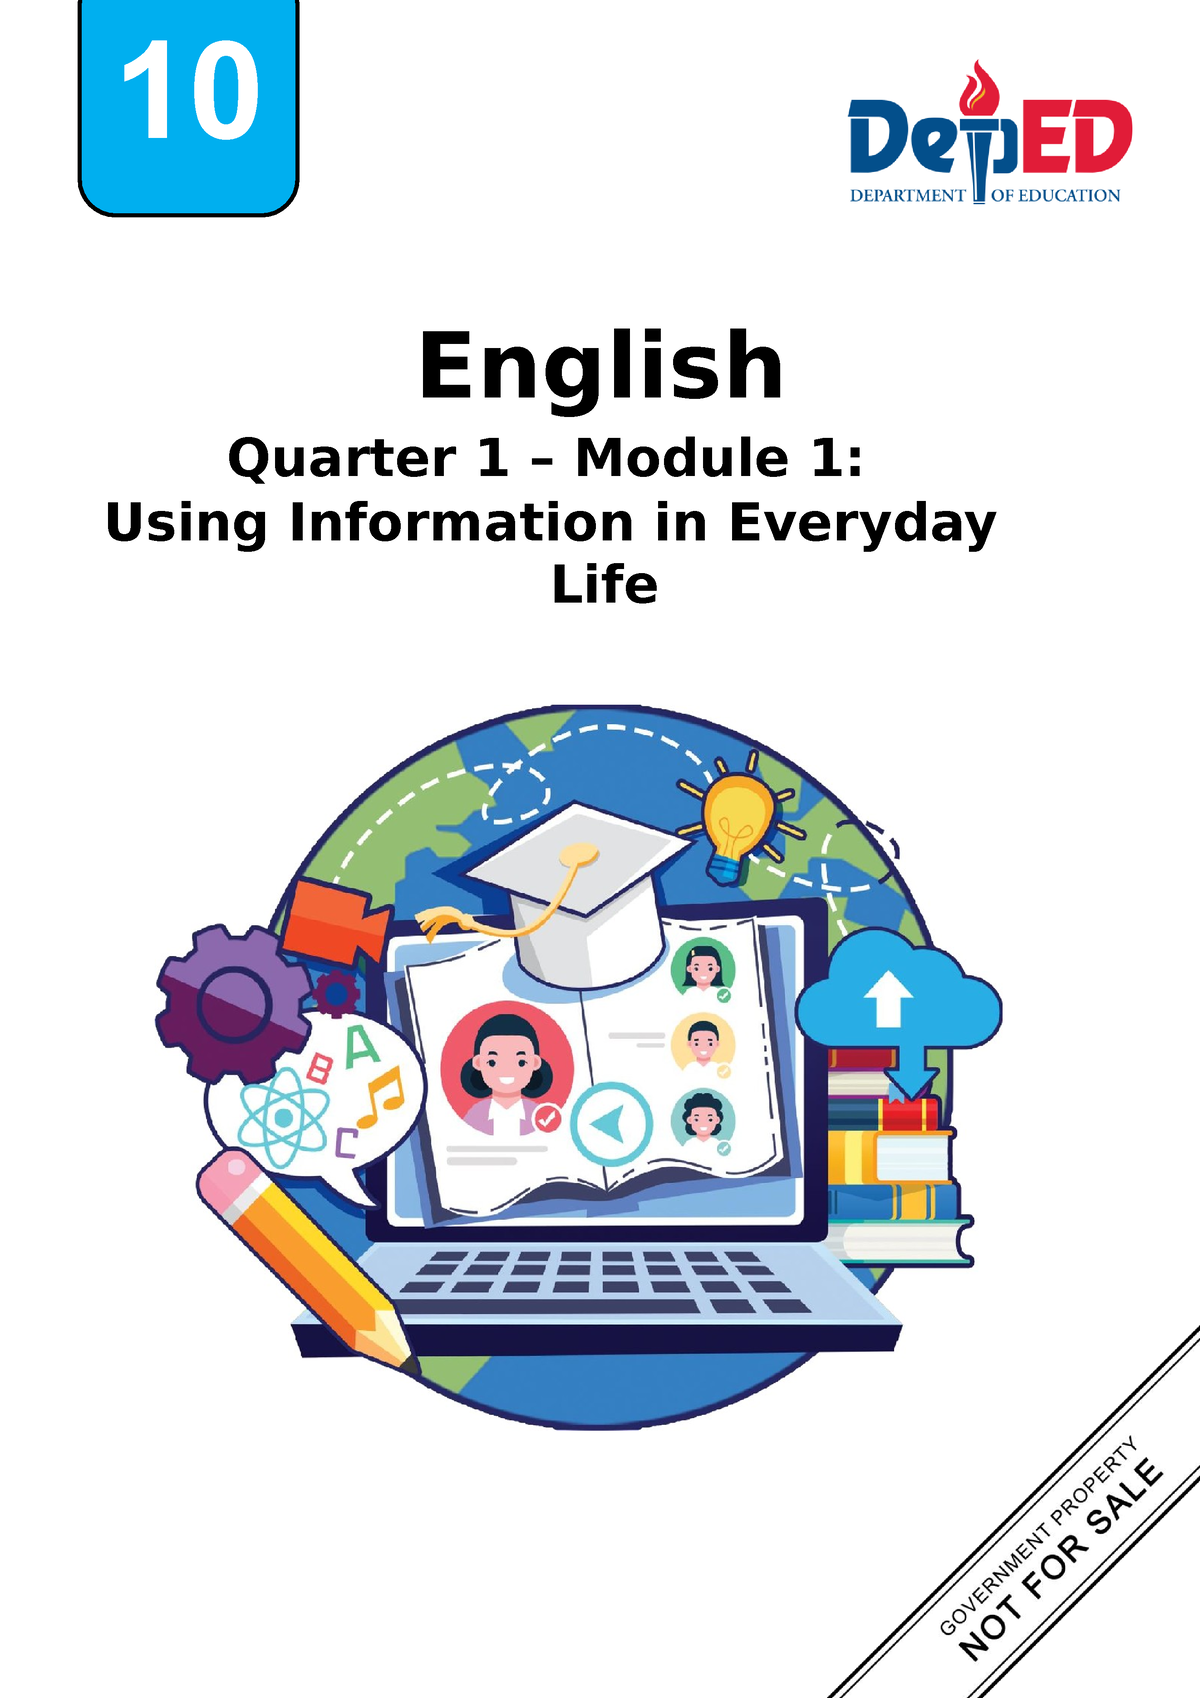 q1-english-10-module-1-for-students-and-printing-10-english-quarter-1